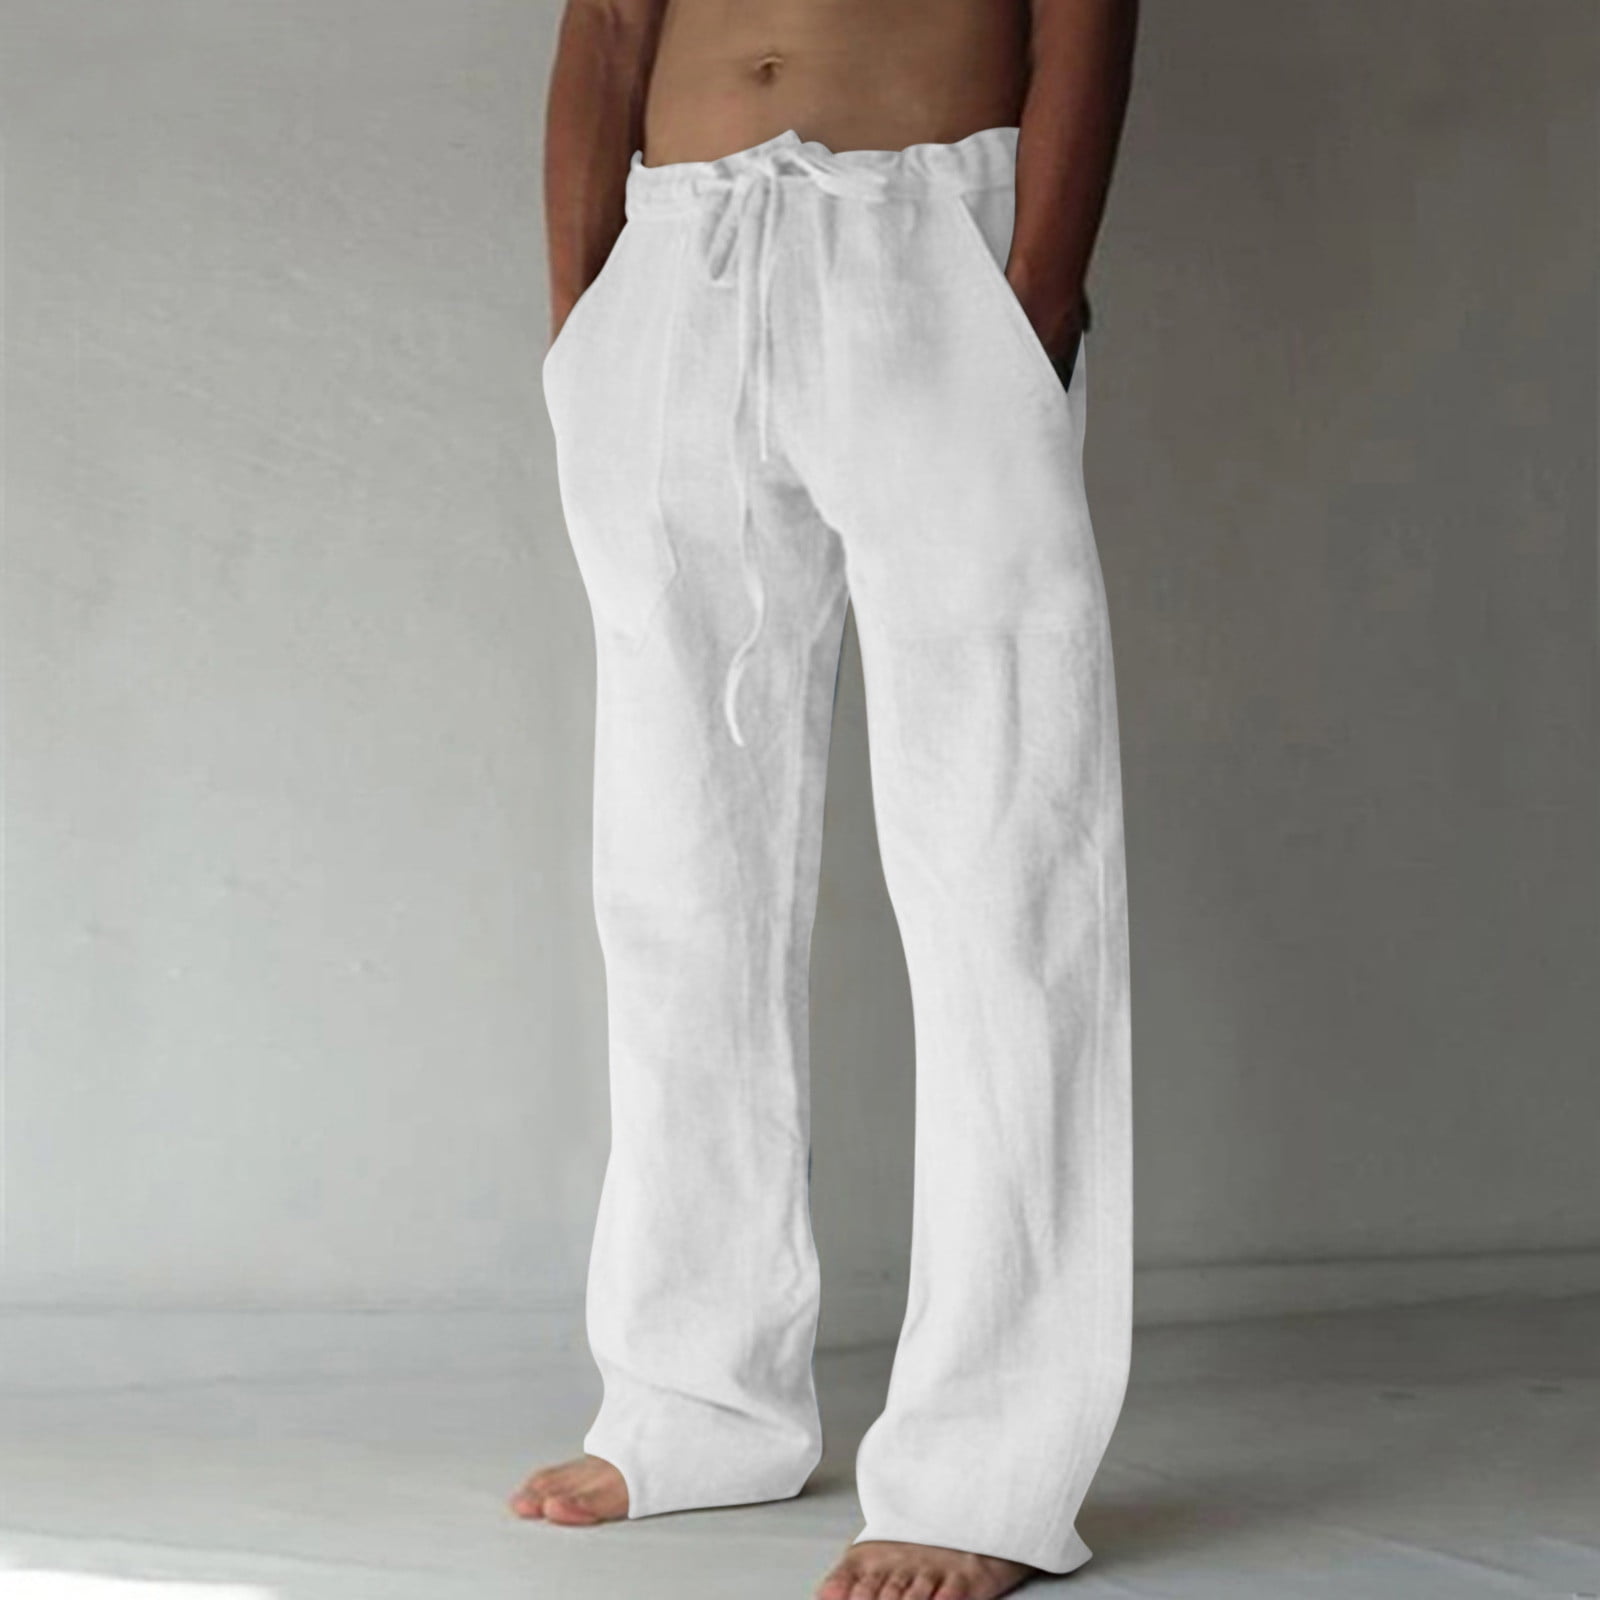 Levmjia Pants for Men Sweatpants Relaxed Fit Men's Cotton And Linen ...